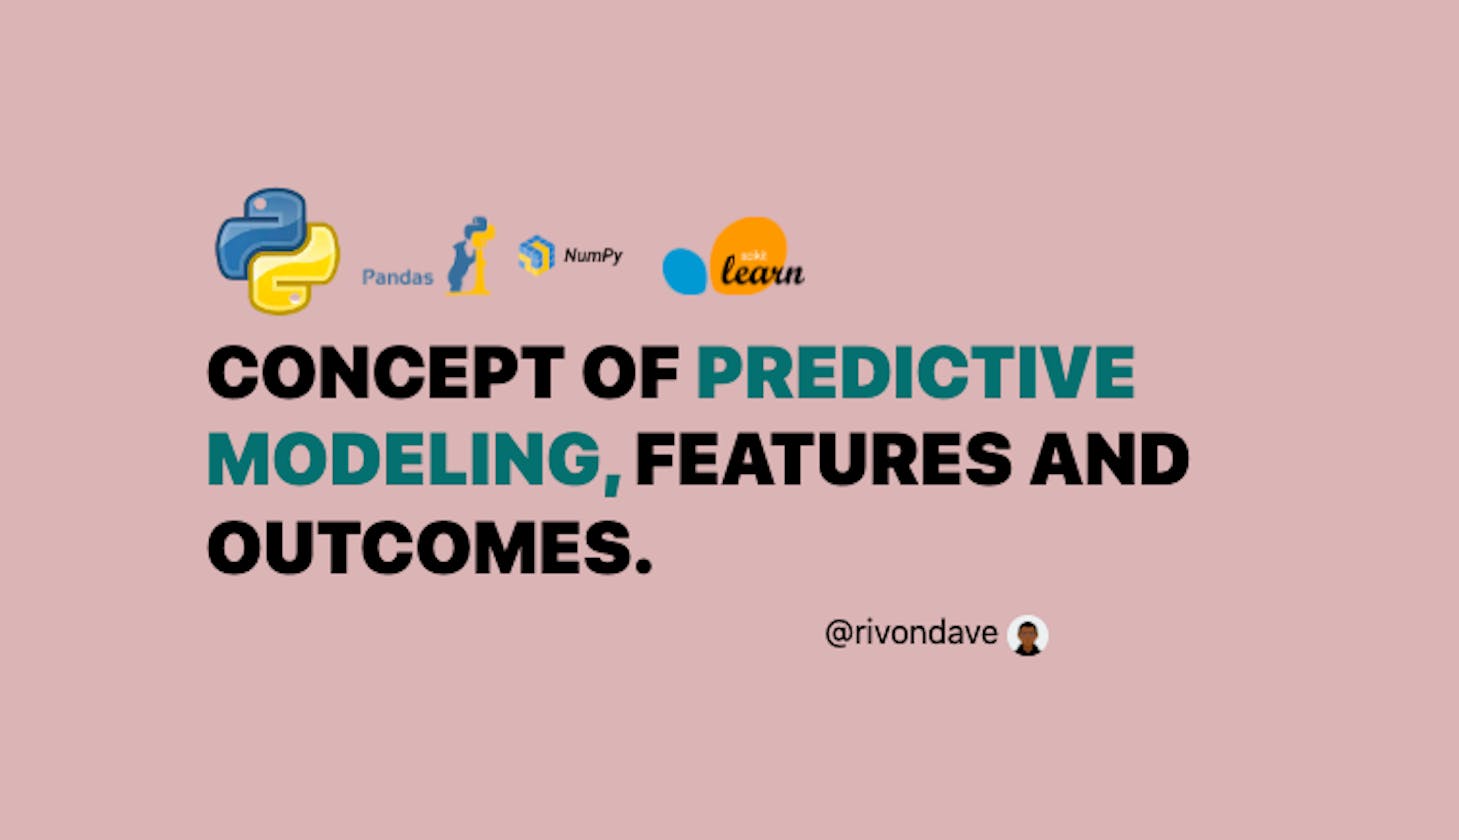 Concept of predictive modeling.